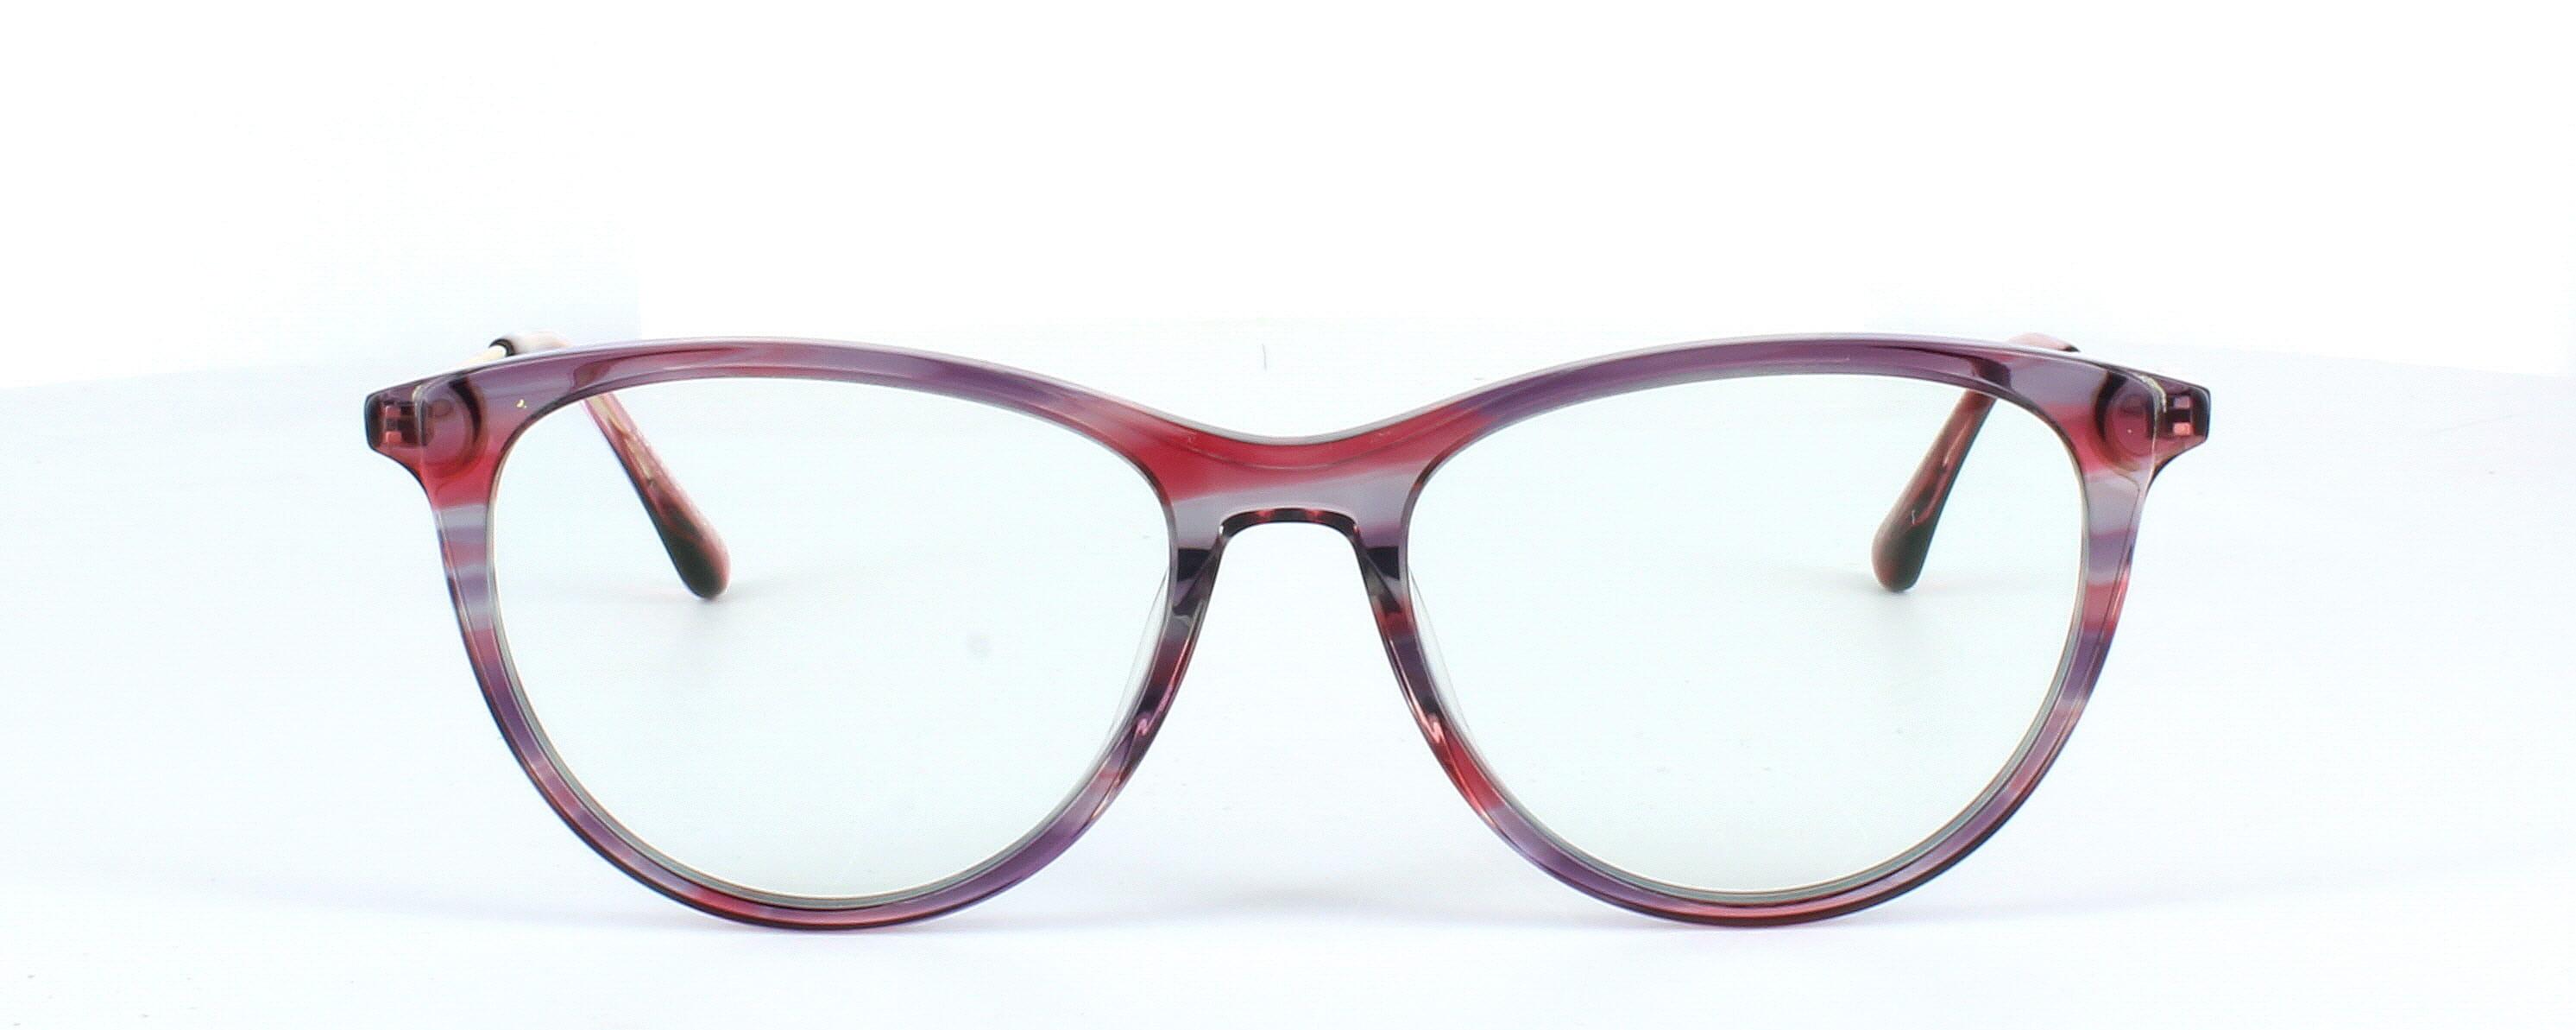 Edward Scotts BJ9201 C618 - Women's oval shaped shiny pink, purple and grey acetate glasses with gold metal spring hinged arms - image view 2